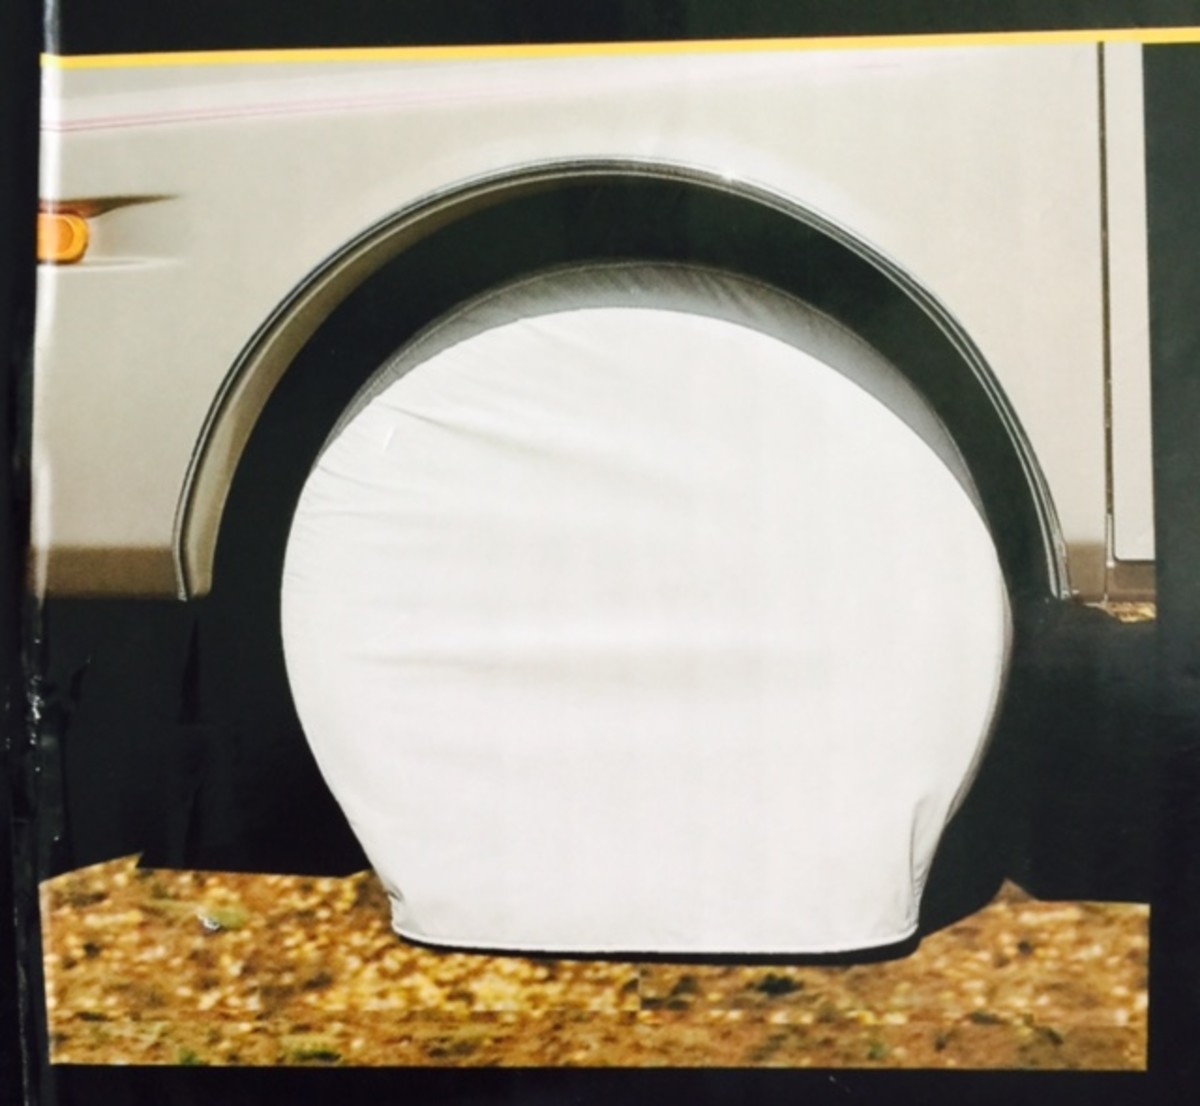 Installing RV Tire Covers: Use Weights, Not Bungee Straps